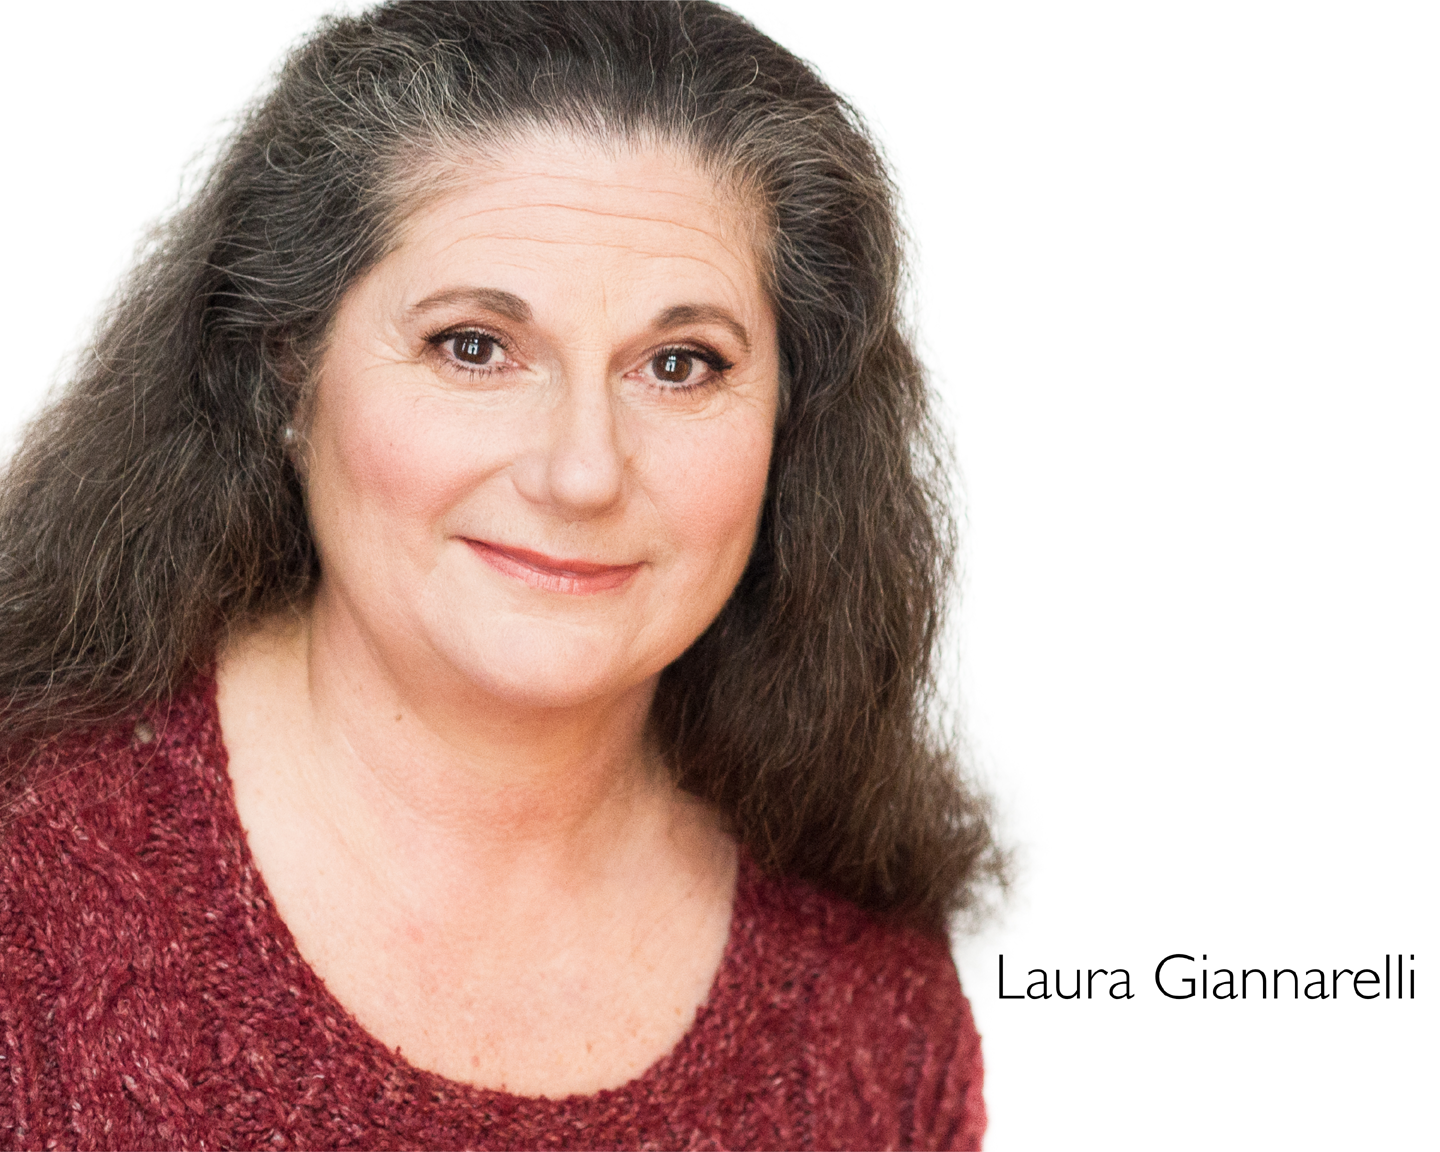 Laura Giannarelli, who plays multiple roles: Old Woman/Teacher/Mother/Utkina.